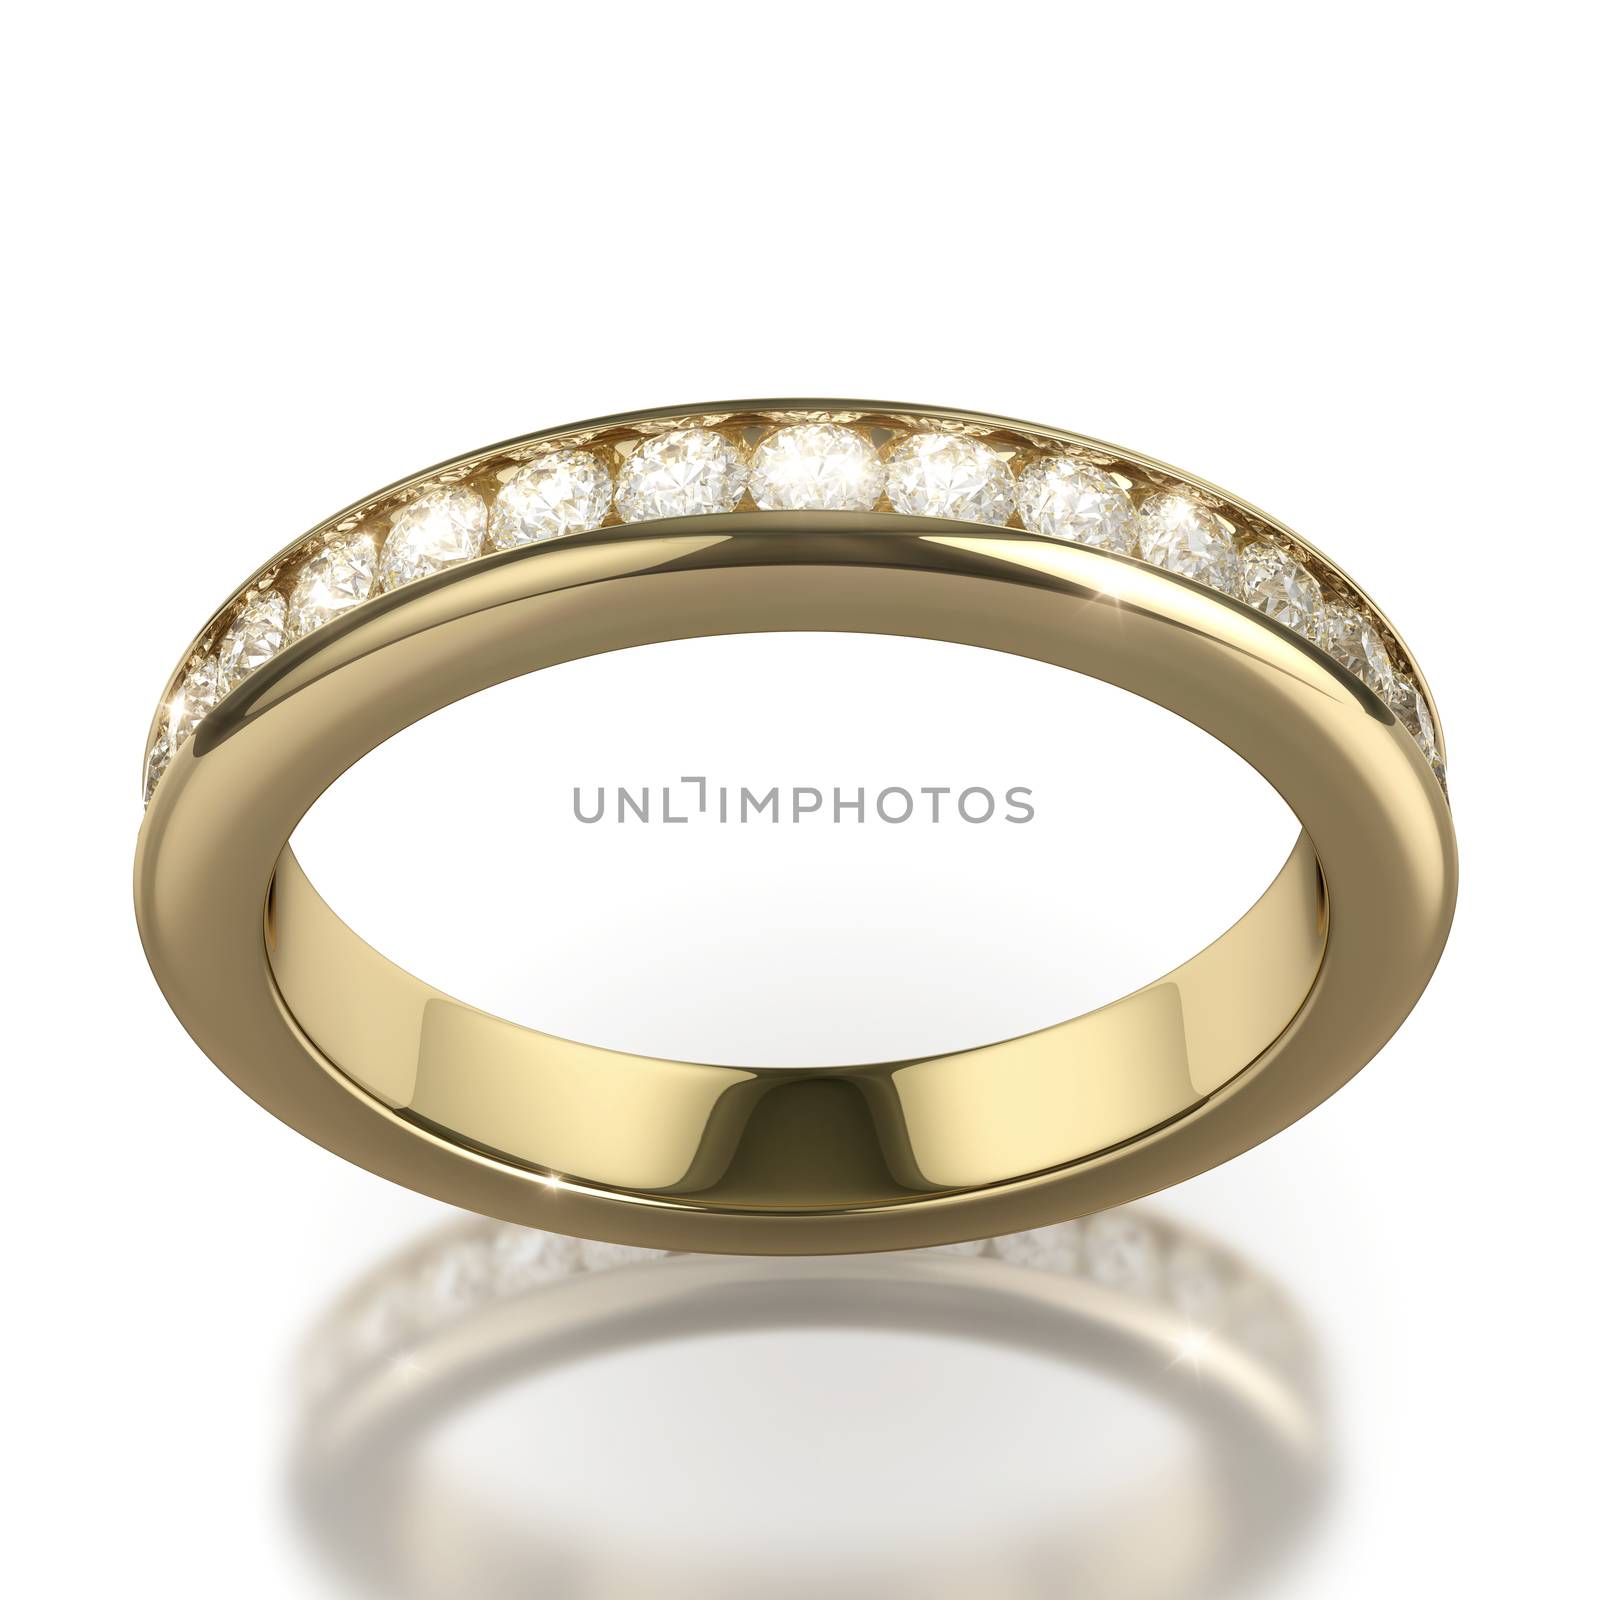 Wedding dIamond ring on white background - with clipping path